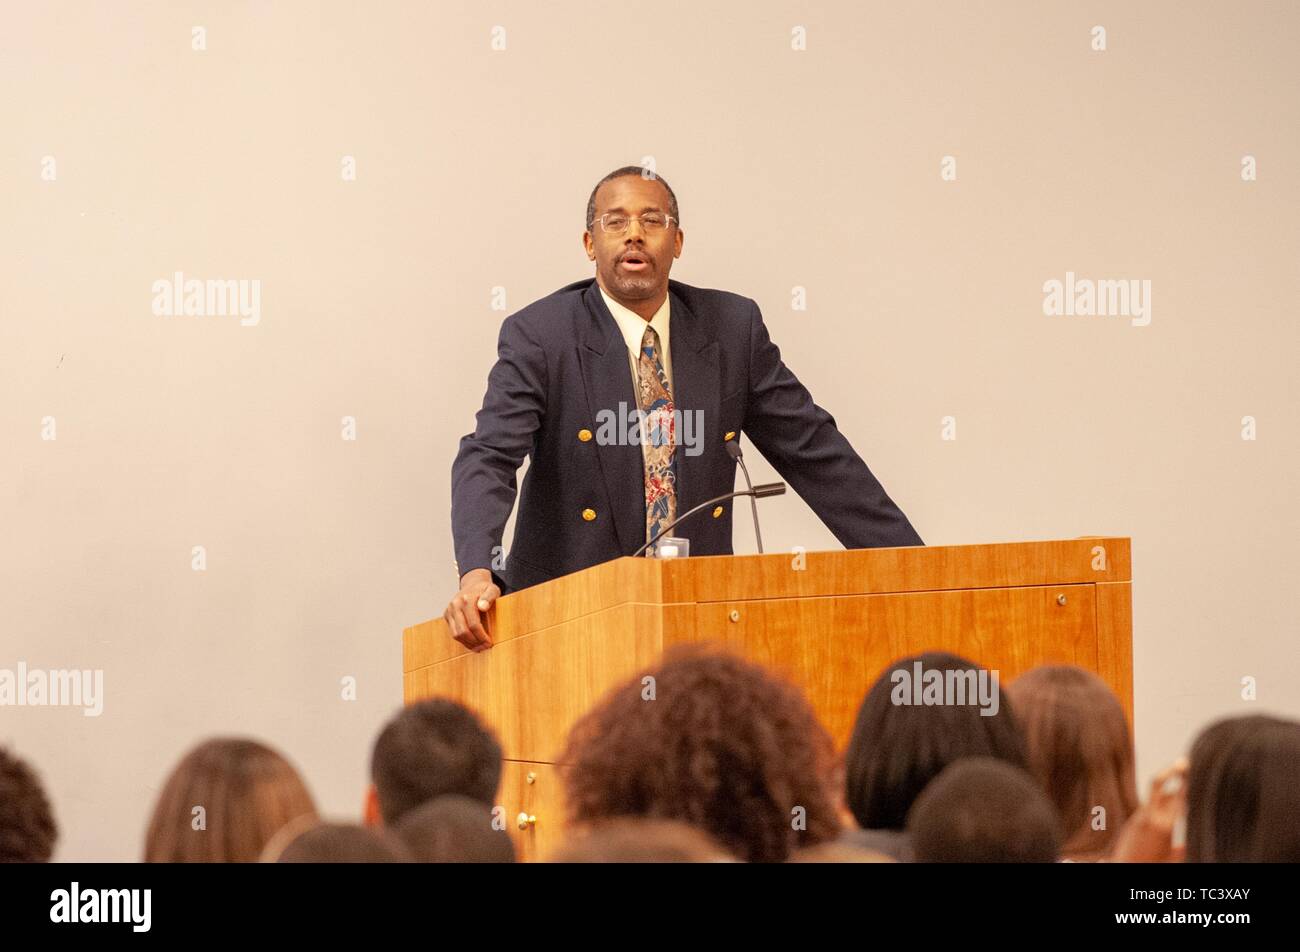 Neurosurgeon and politician Ben Carson, from the waist up, speaking from a podium during the Minority Pre-Health Conference at the Johns Hopkins University, Baltimore, Maryland, February 29, 2008. From the Homewood Photography Collection. () Stock Photo